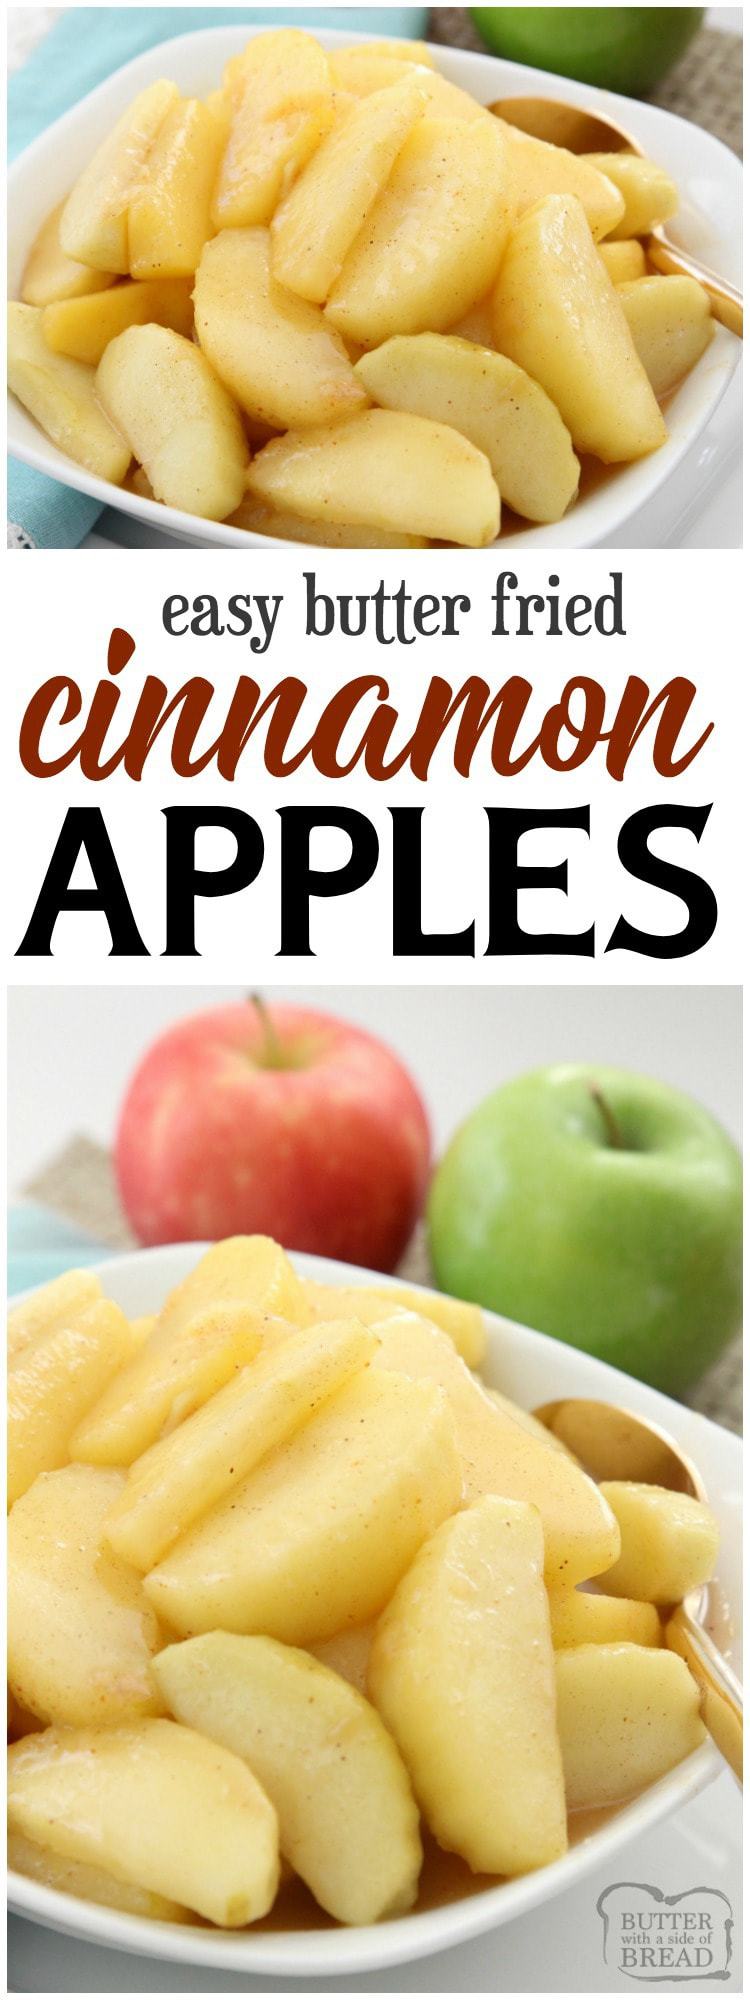 Cinnamon Apples recipe that's simple to make & spiced with cinnamon & nutmeg. Fried with butter & brown sugar, they taste incredible with #dinner or #dessert! Easy Fried #Cinnamon #Apples #recipe from Butter With A Side of Bread